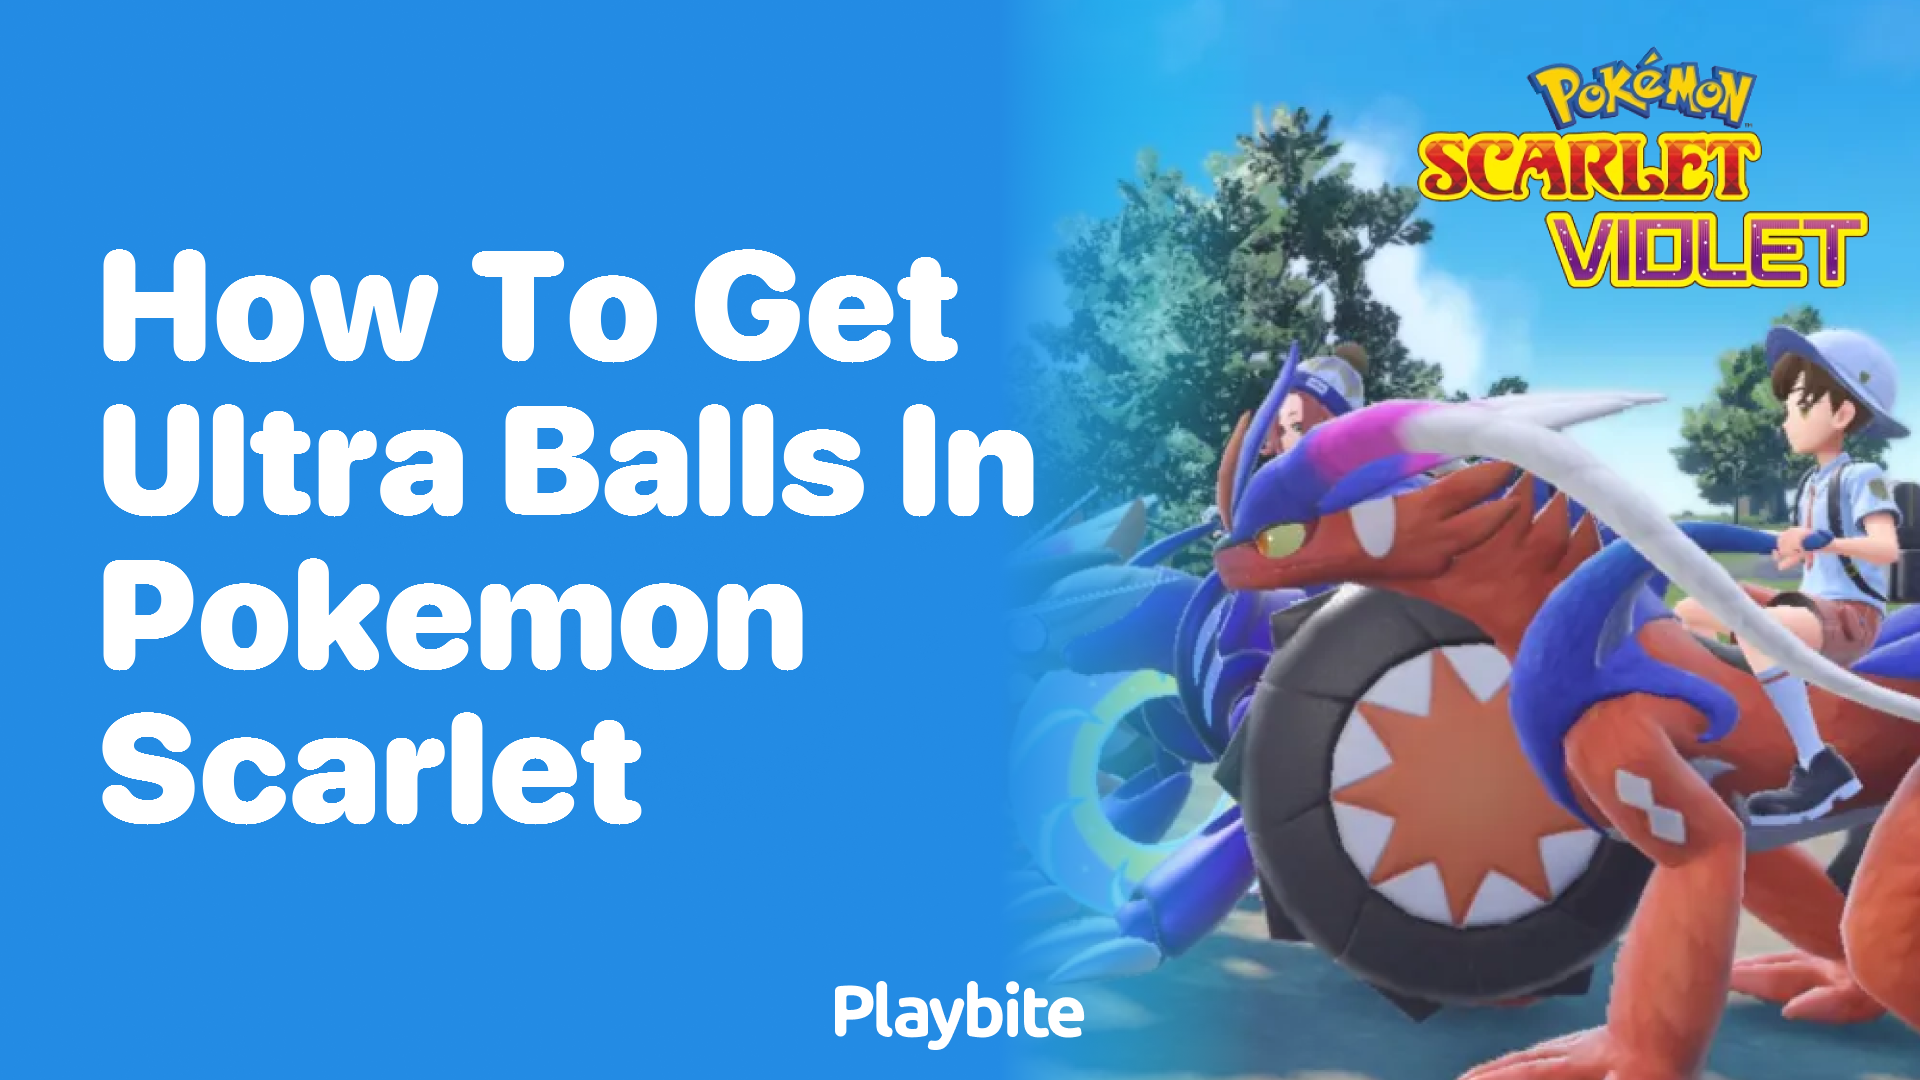 Pokémon Scarlet & Violet: How To Get More Ultra Balls (The Fast Way)